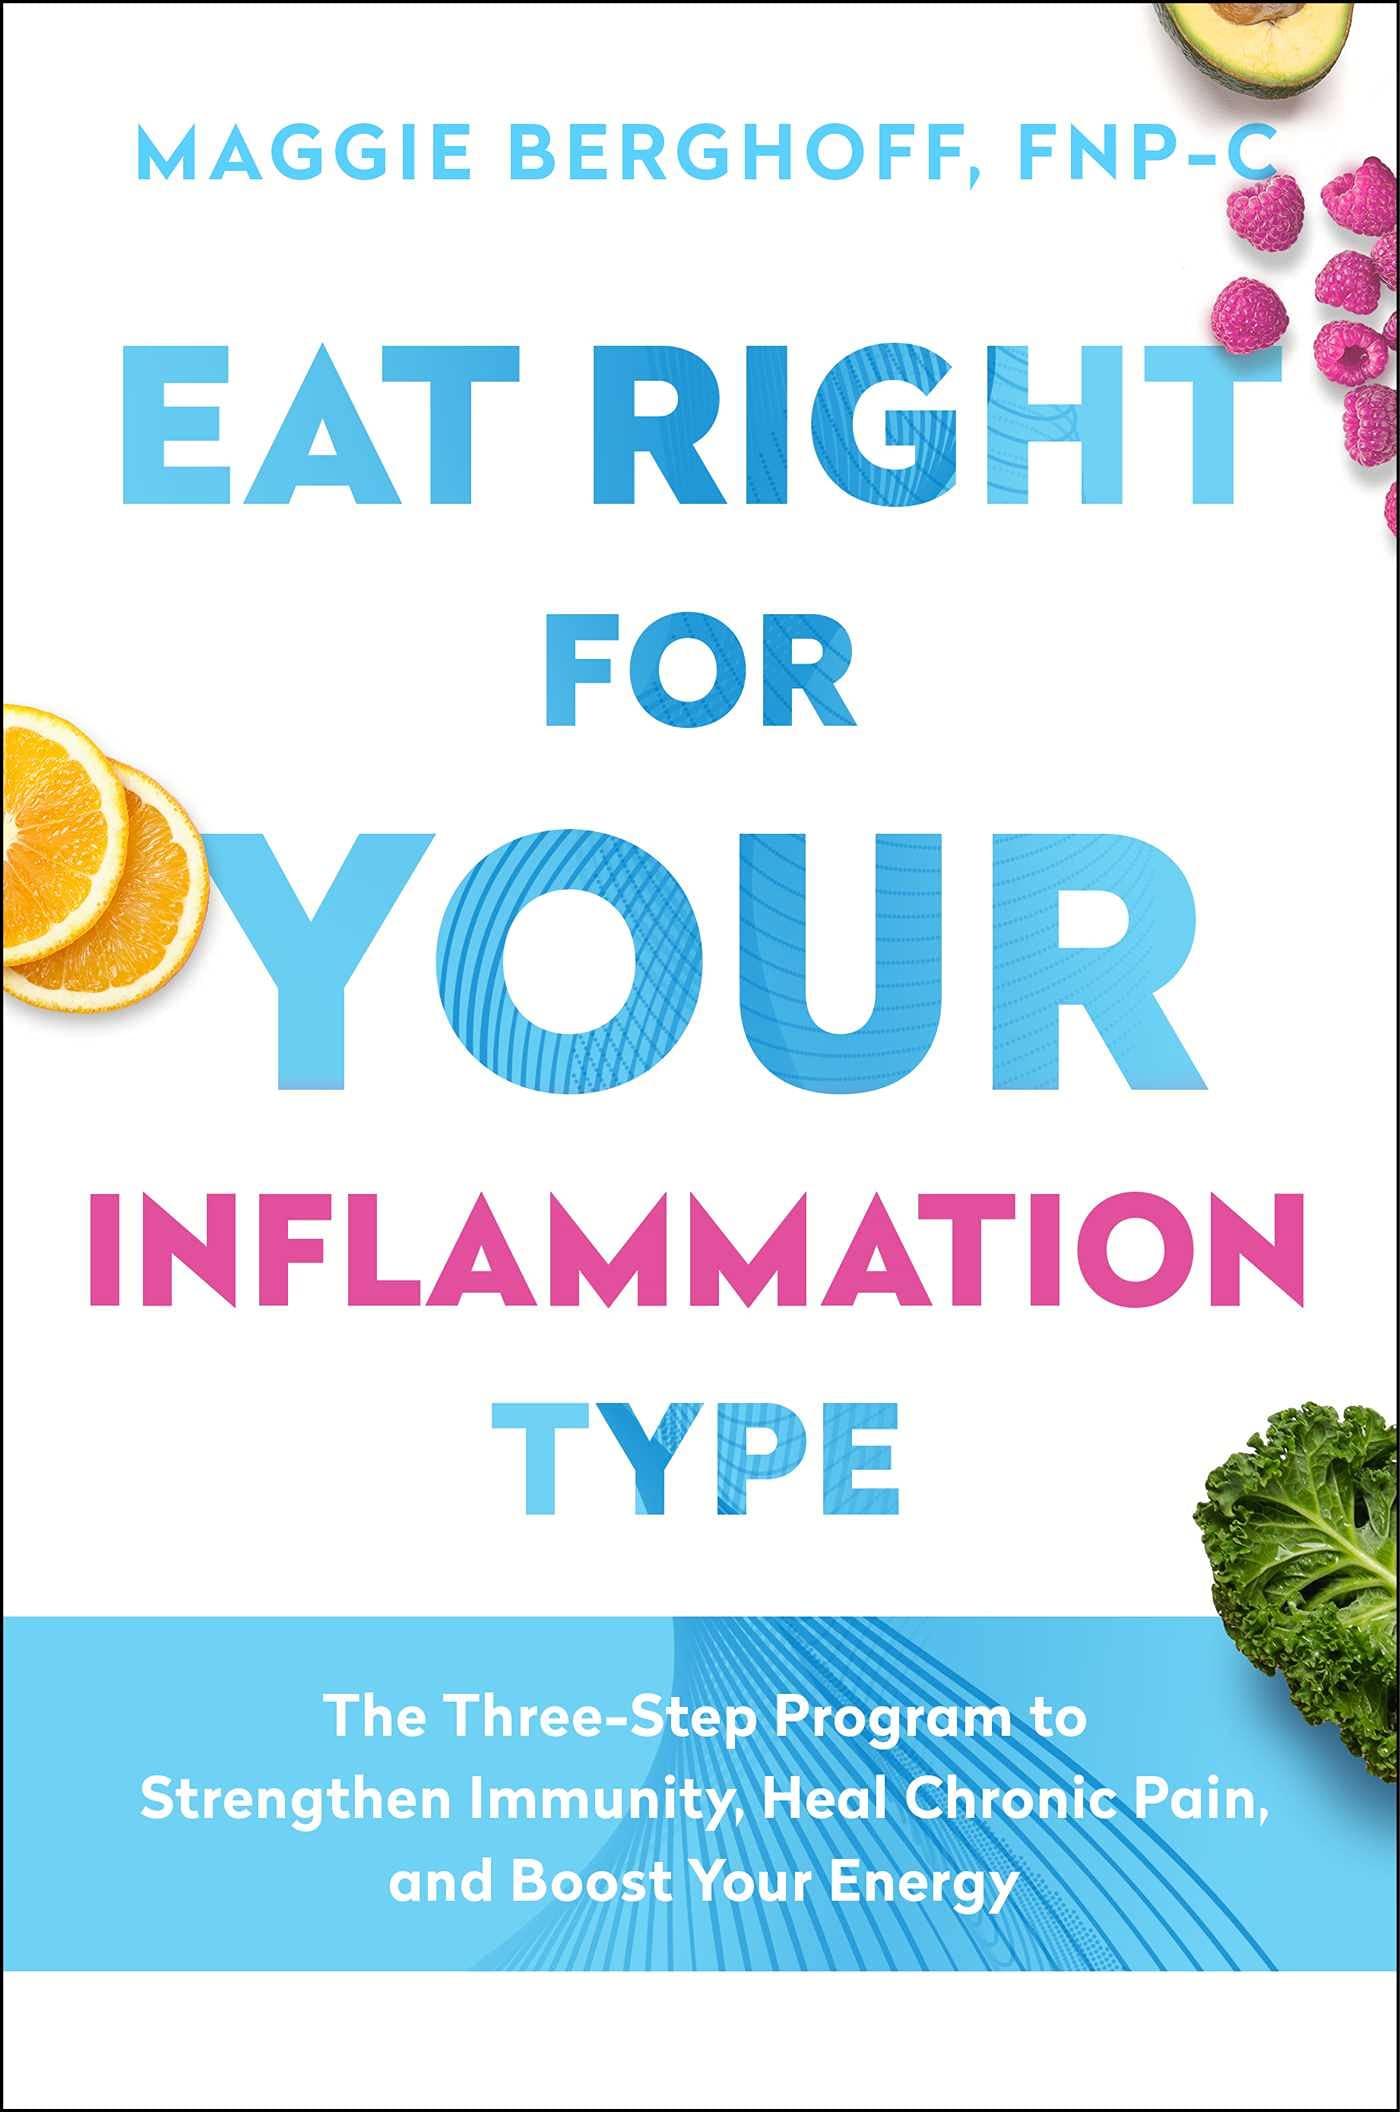 Image for "Eat Right for Your Inflammation Type"